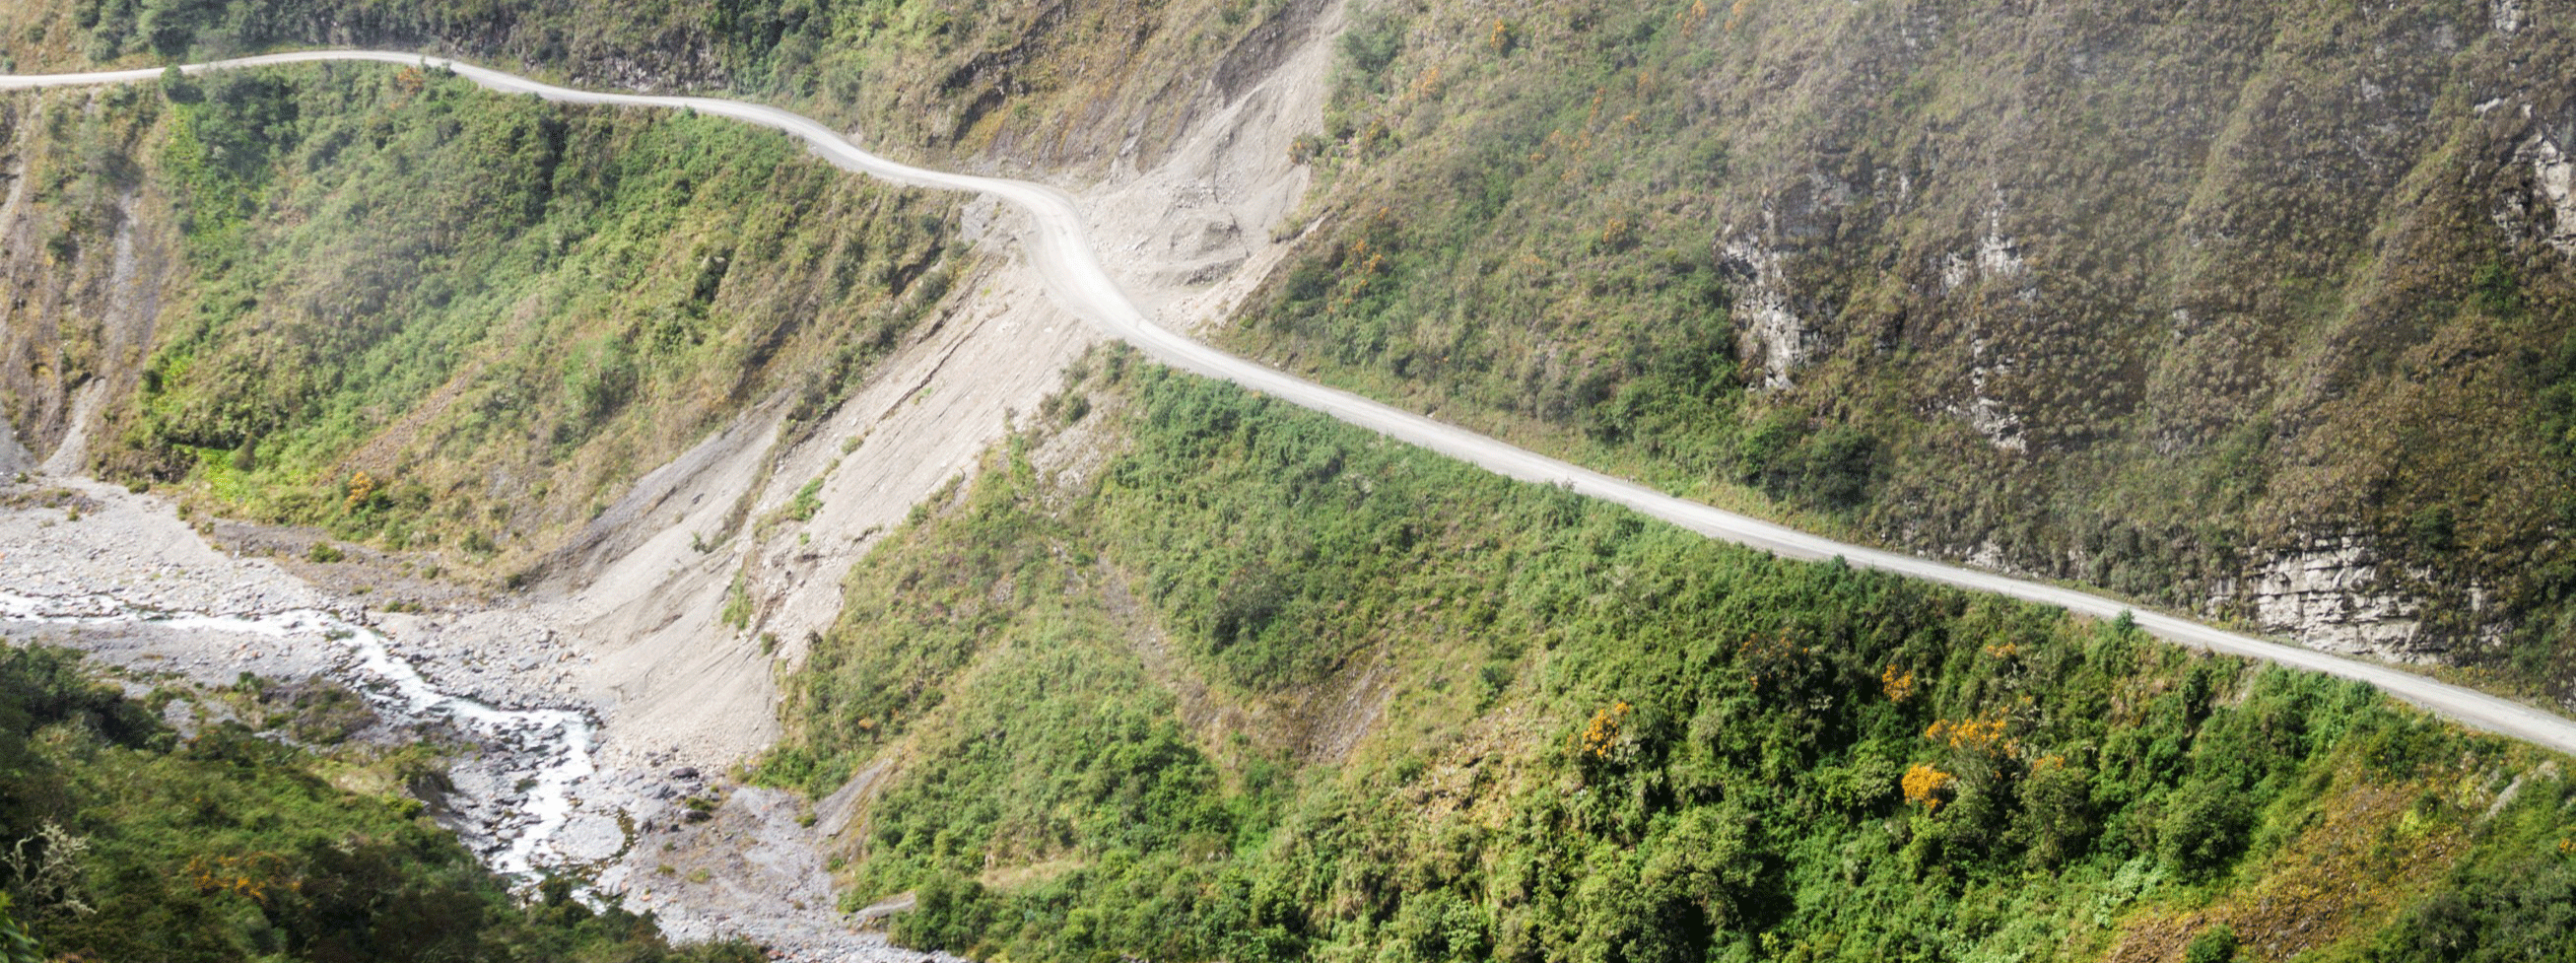 /resource/Images/southamerica/bolivia/headerimage/Dangerous-narrow-road-in-Yungas-mountains,-Bolivia.png